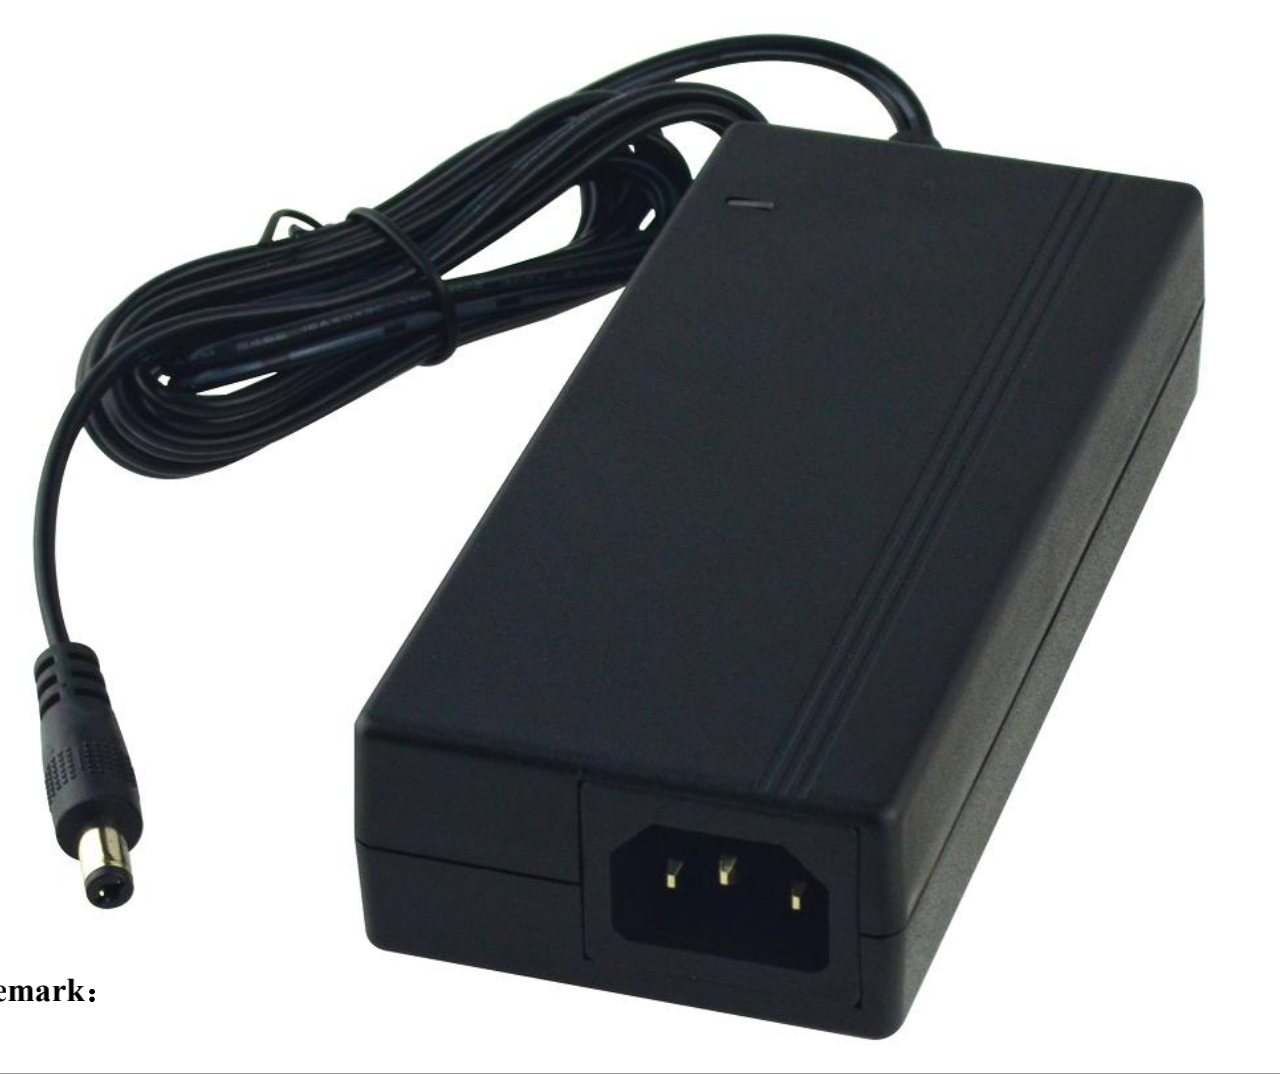 The purpose of the document is to specify the functional requirements of a 126W switching power supply.